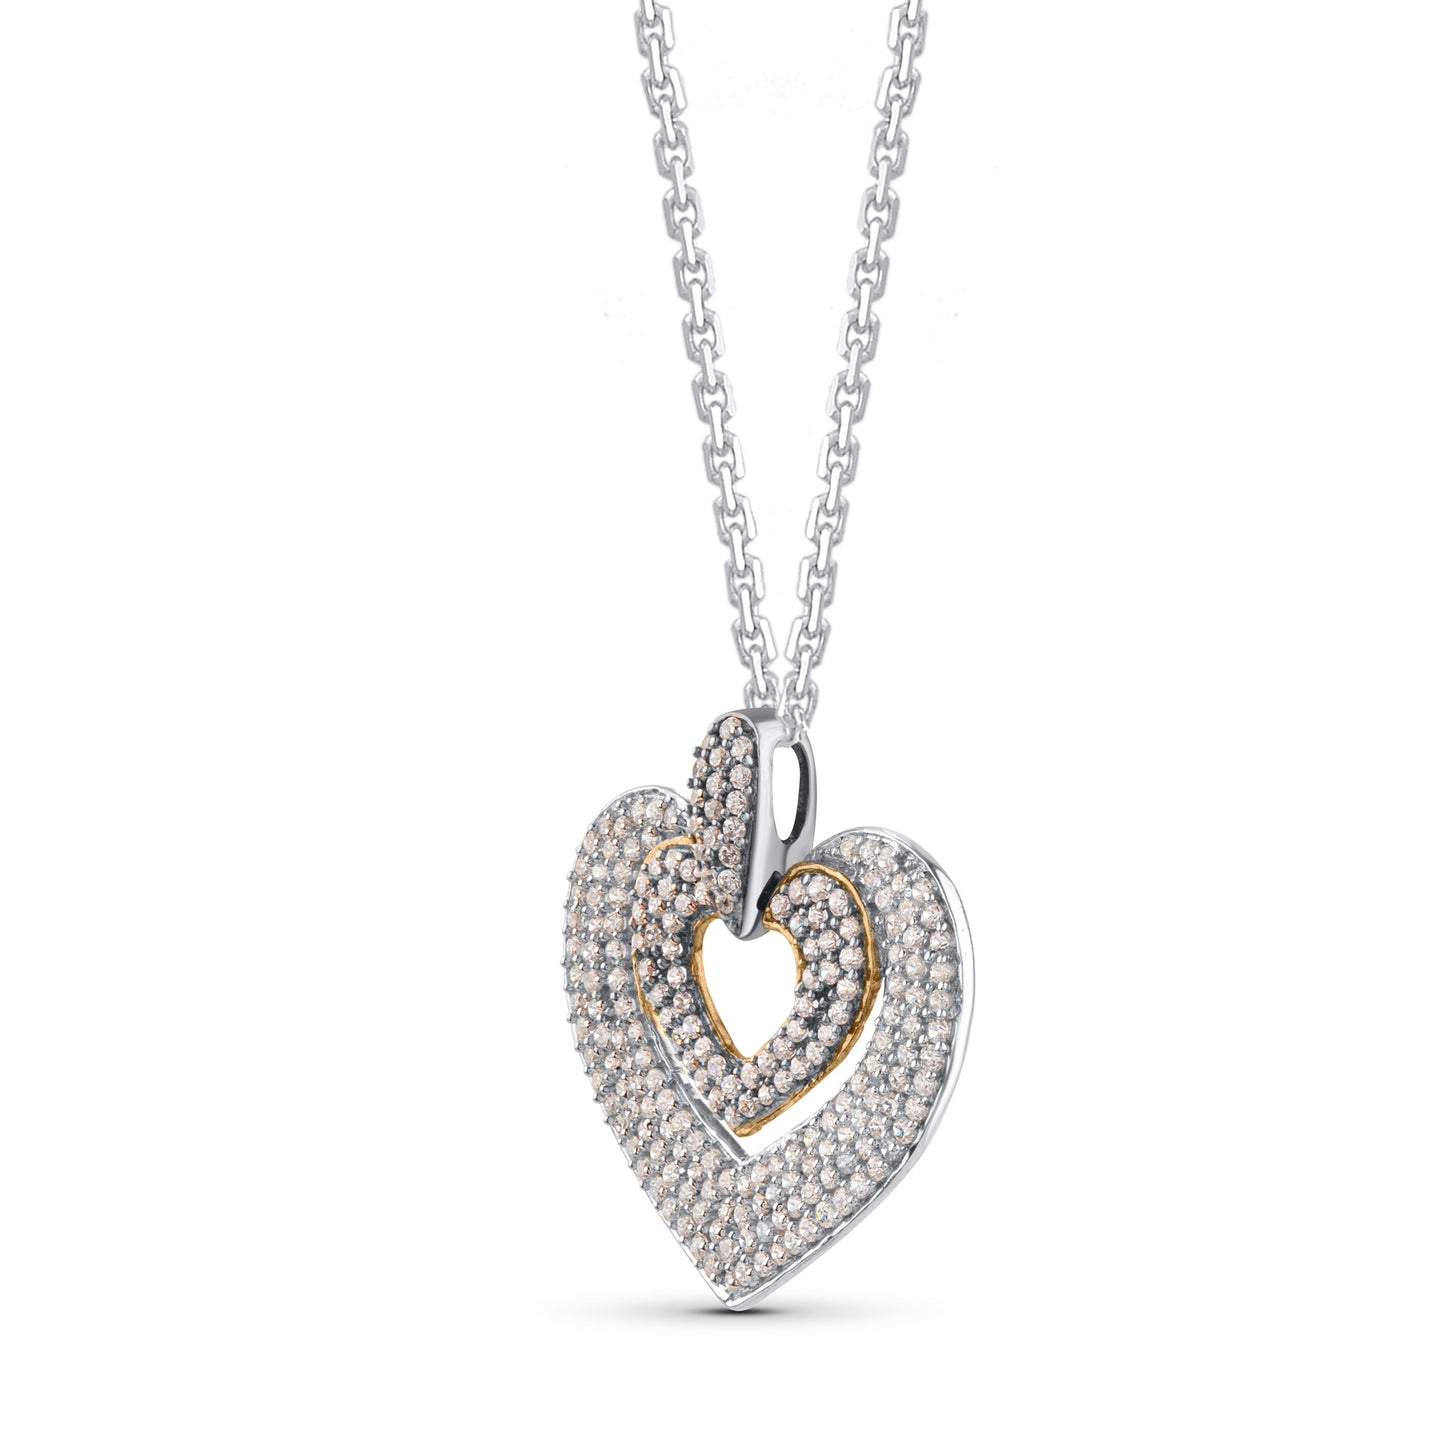 Double Heart Pendant Necklace in Gold Plated 925 Sterling Silver